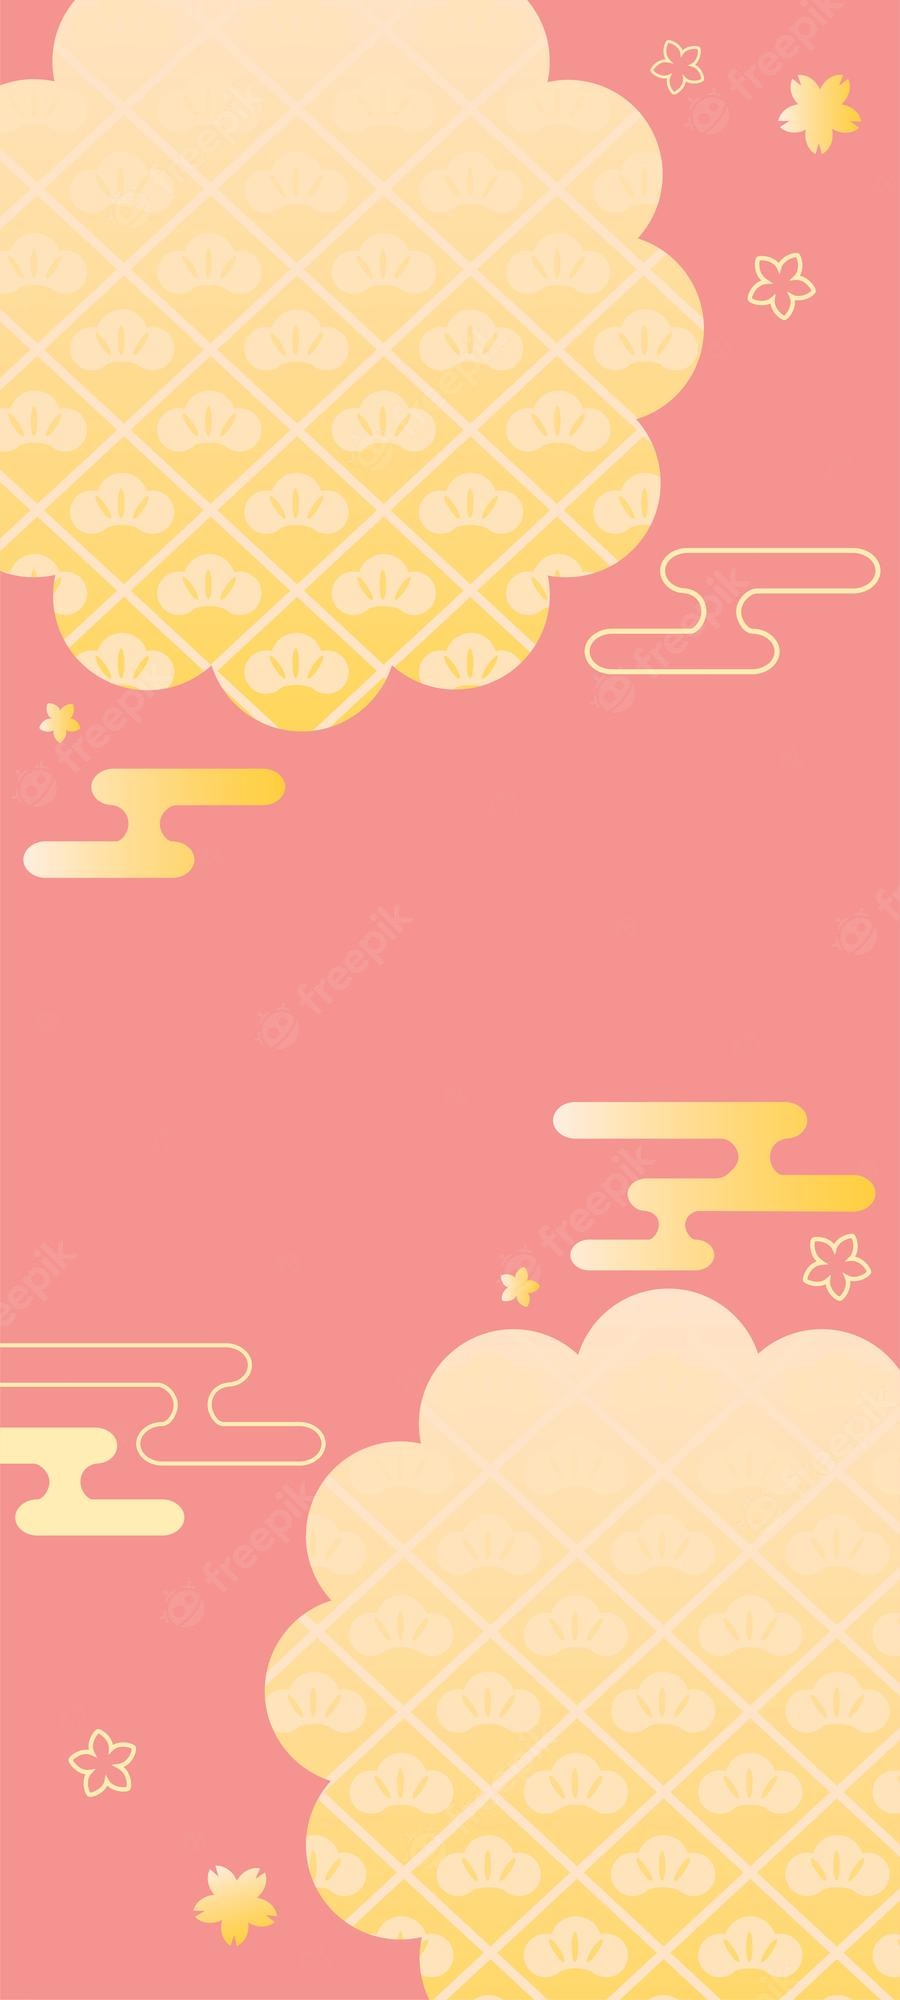 Premium Vector. Japanese background illustration of the new year holidays